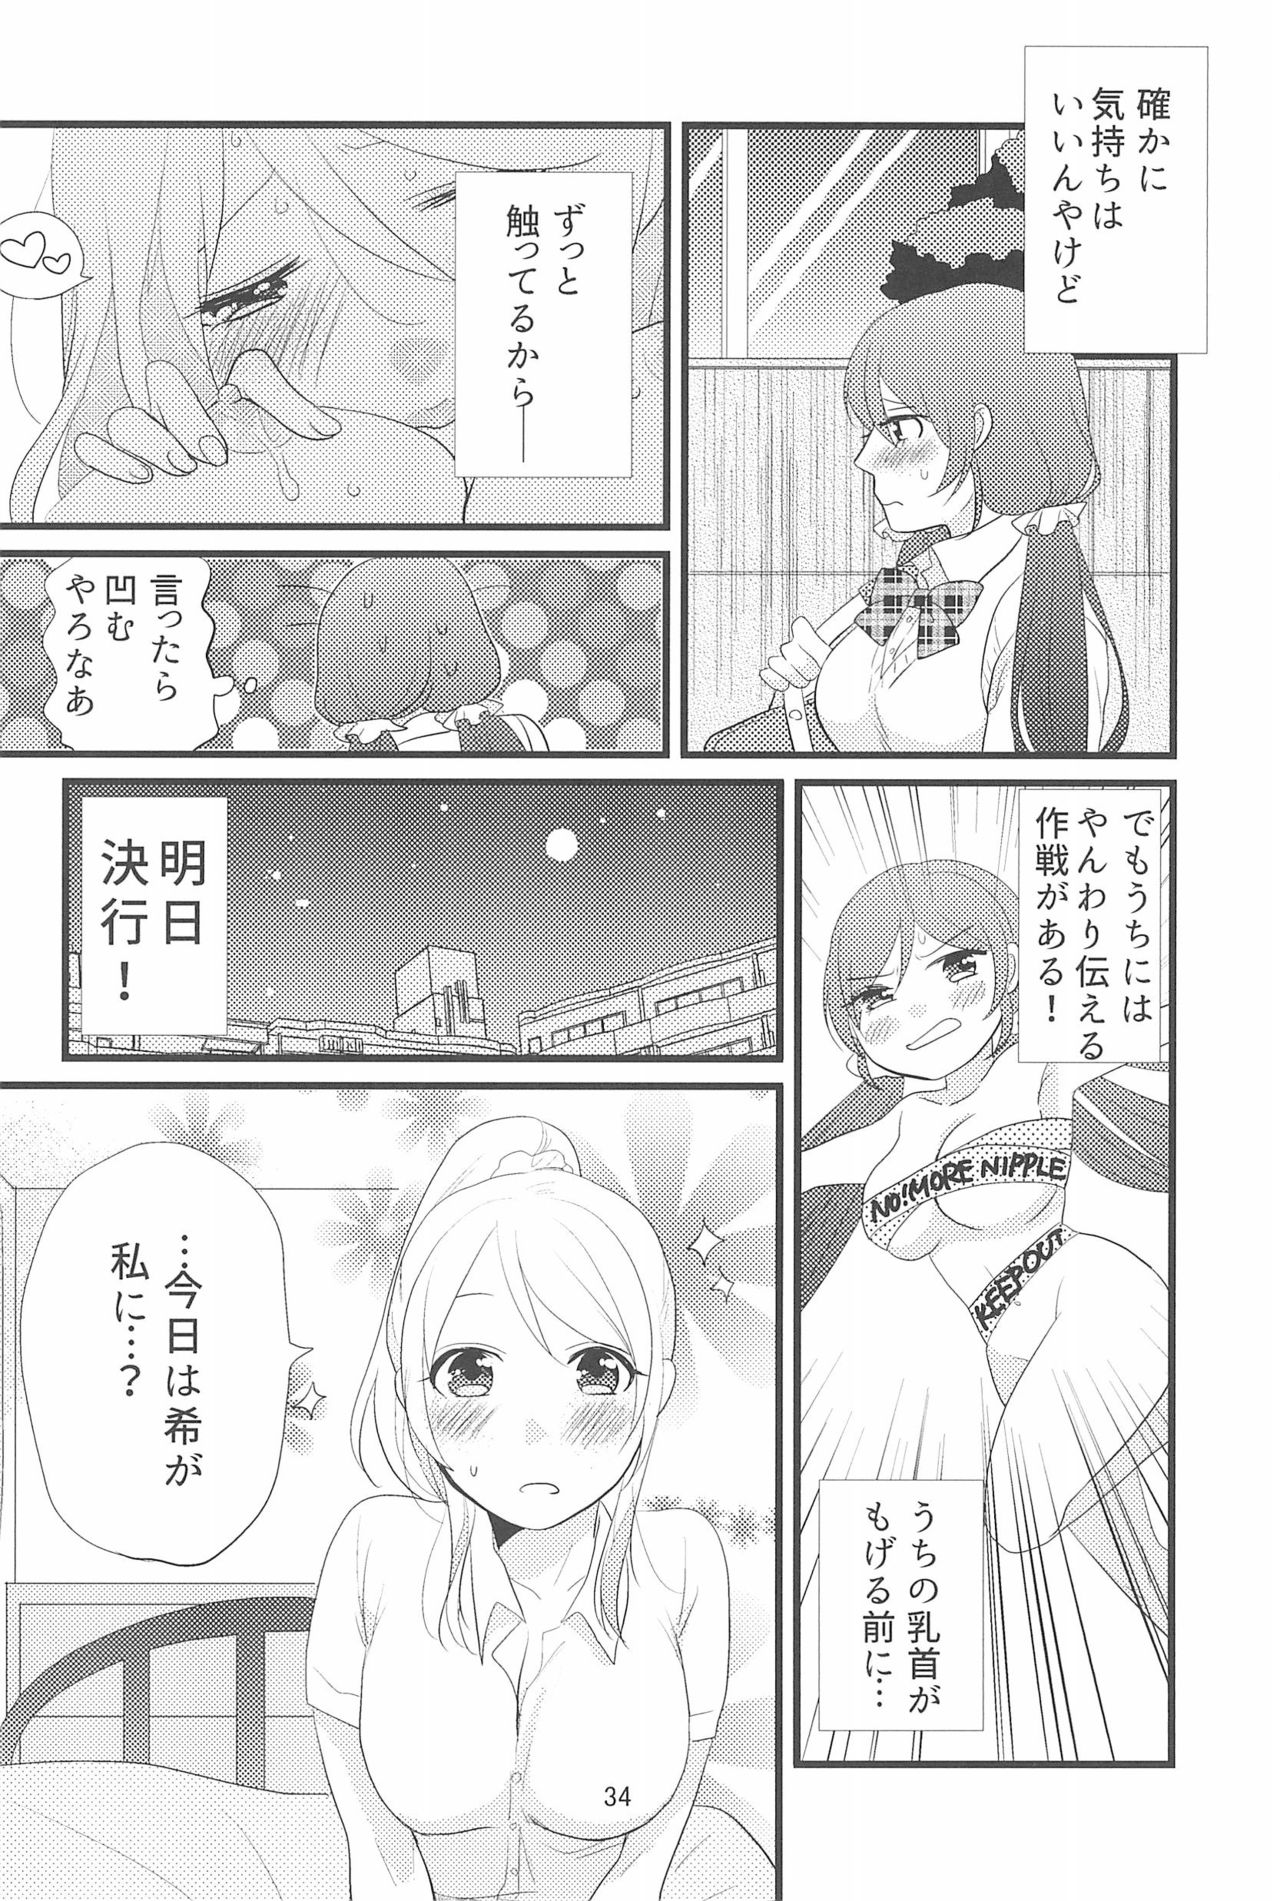 (C90) [BK*N2 (Mikawa Miso)] HAPPY GO LUCKY DAYS (Love Live!) page 38 full